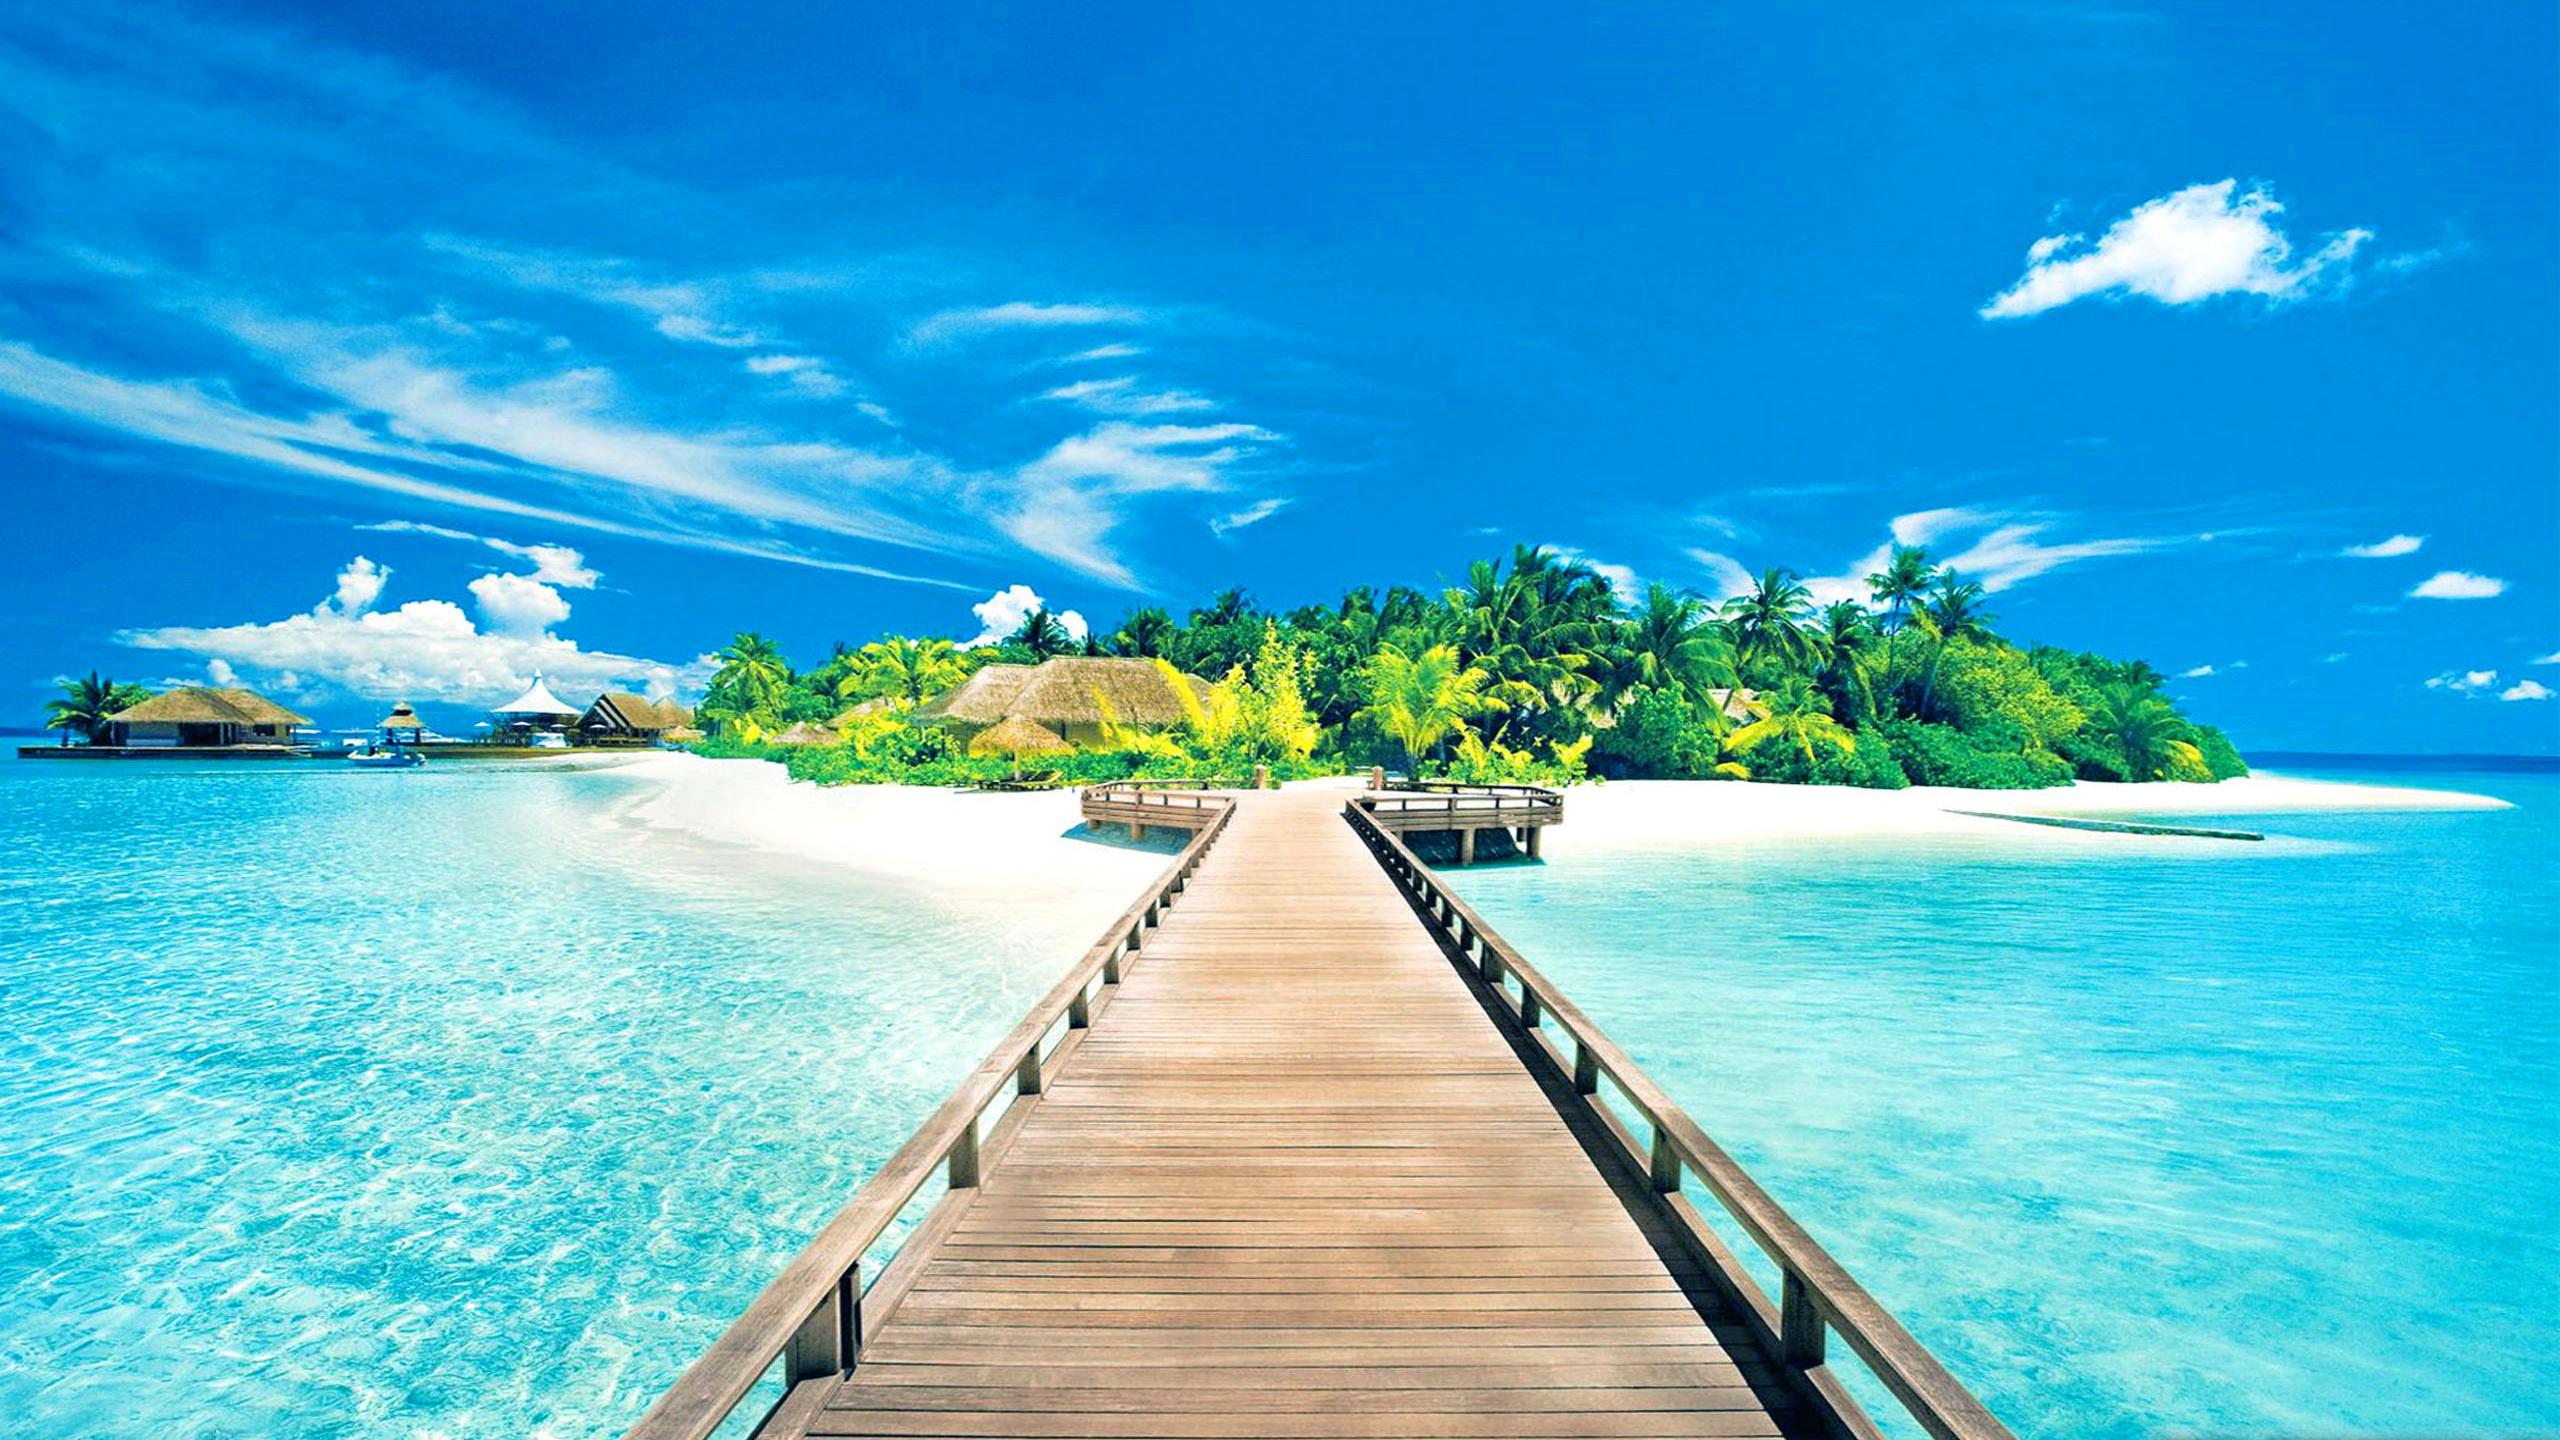 Tropical Island in Germany Cool Photos   World Visits